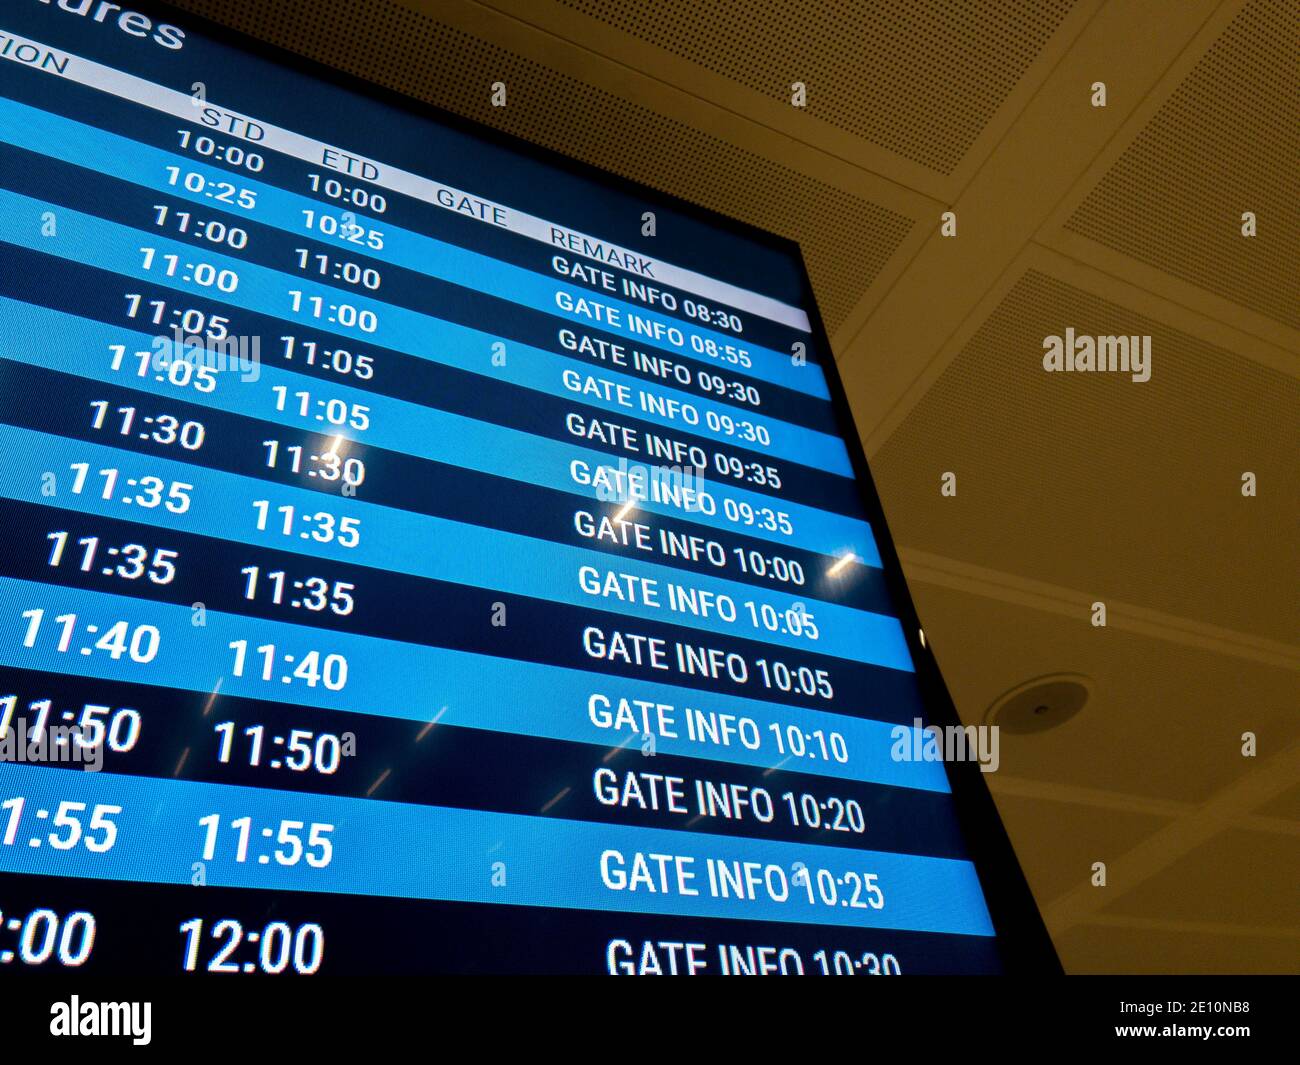 A blue digital screen at an airport announcing time and gate info for each flight. Stock Photo